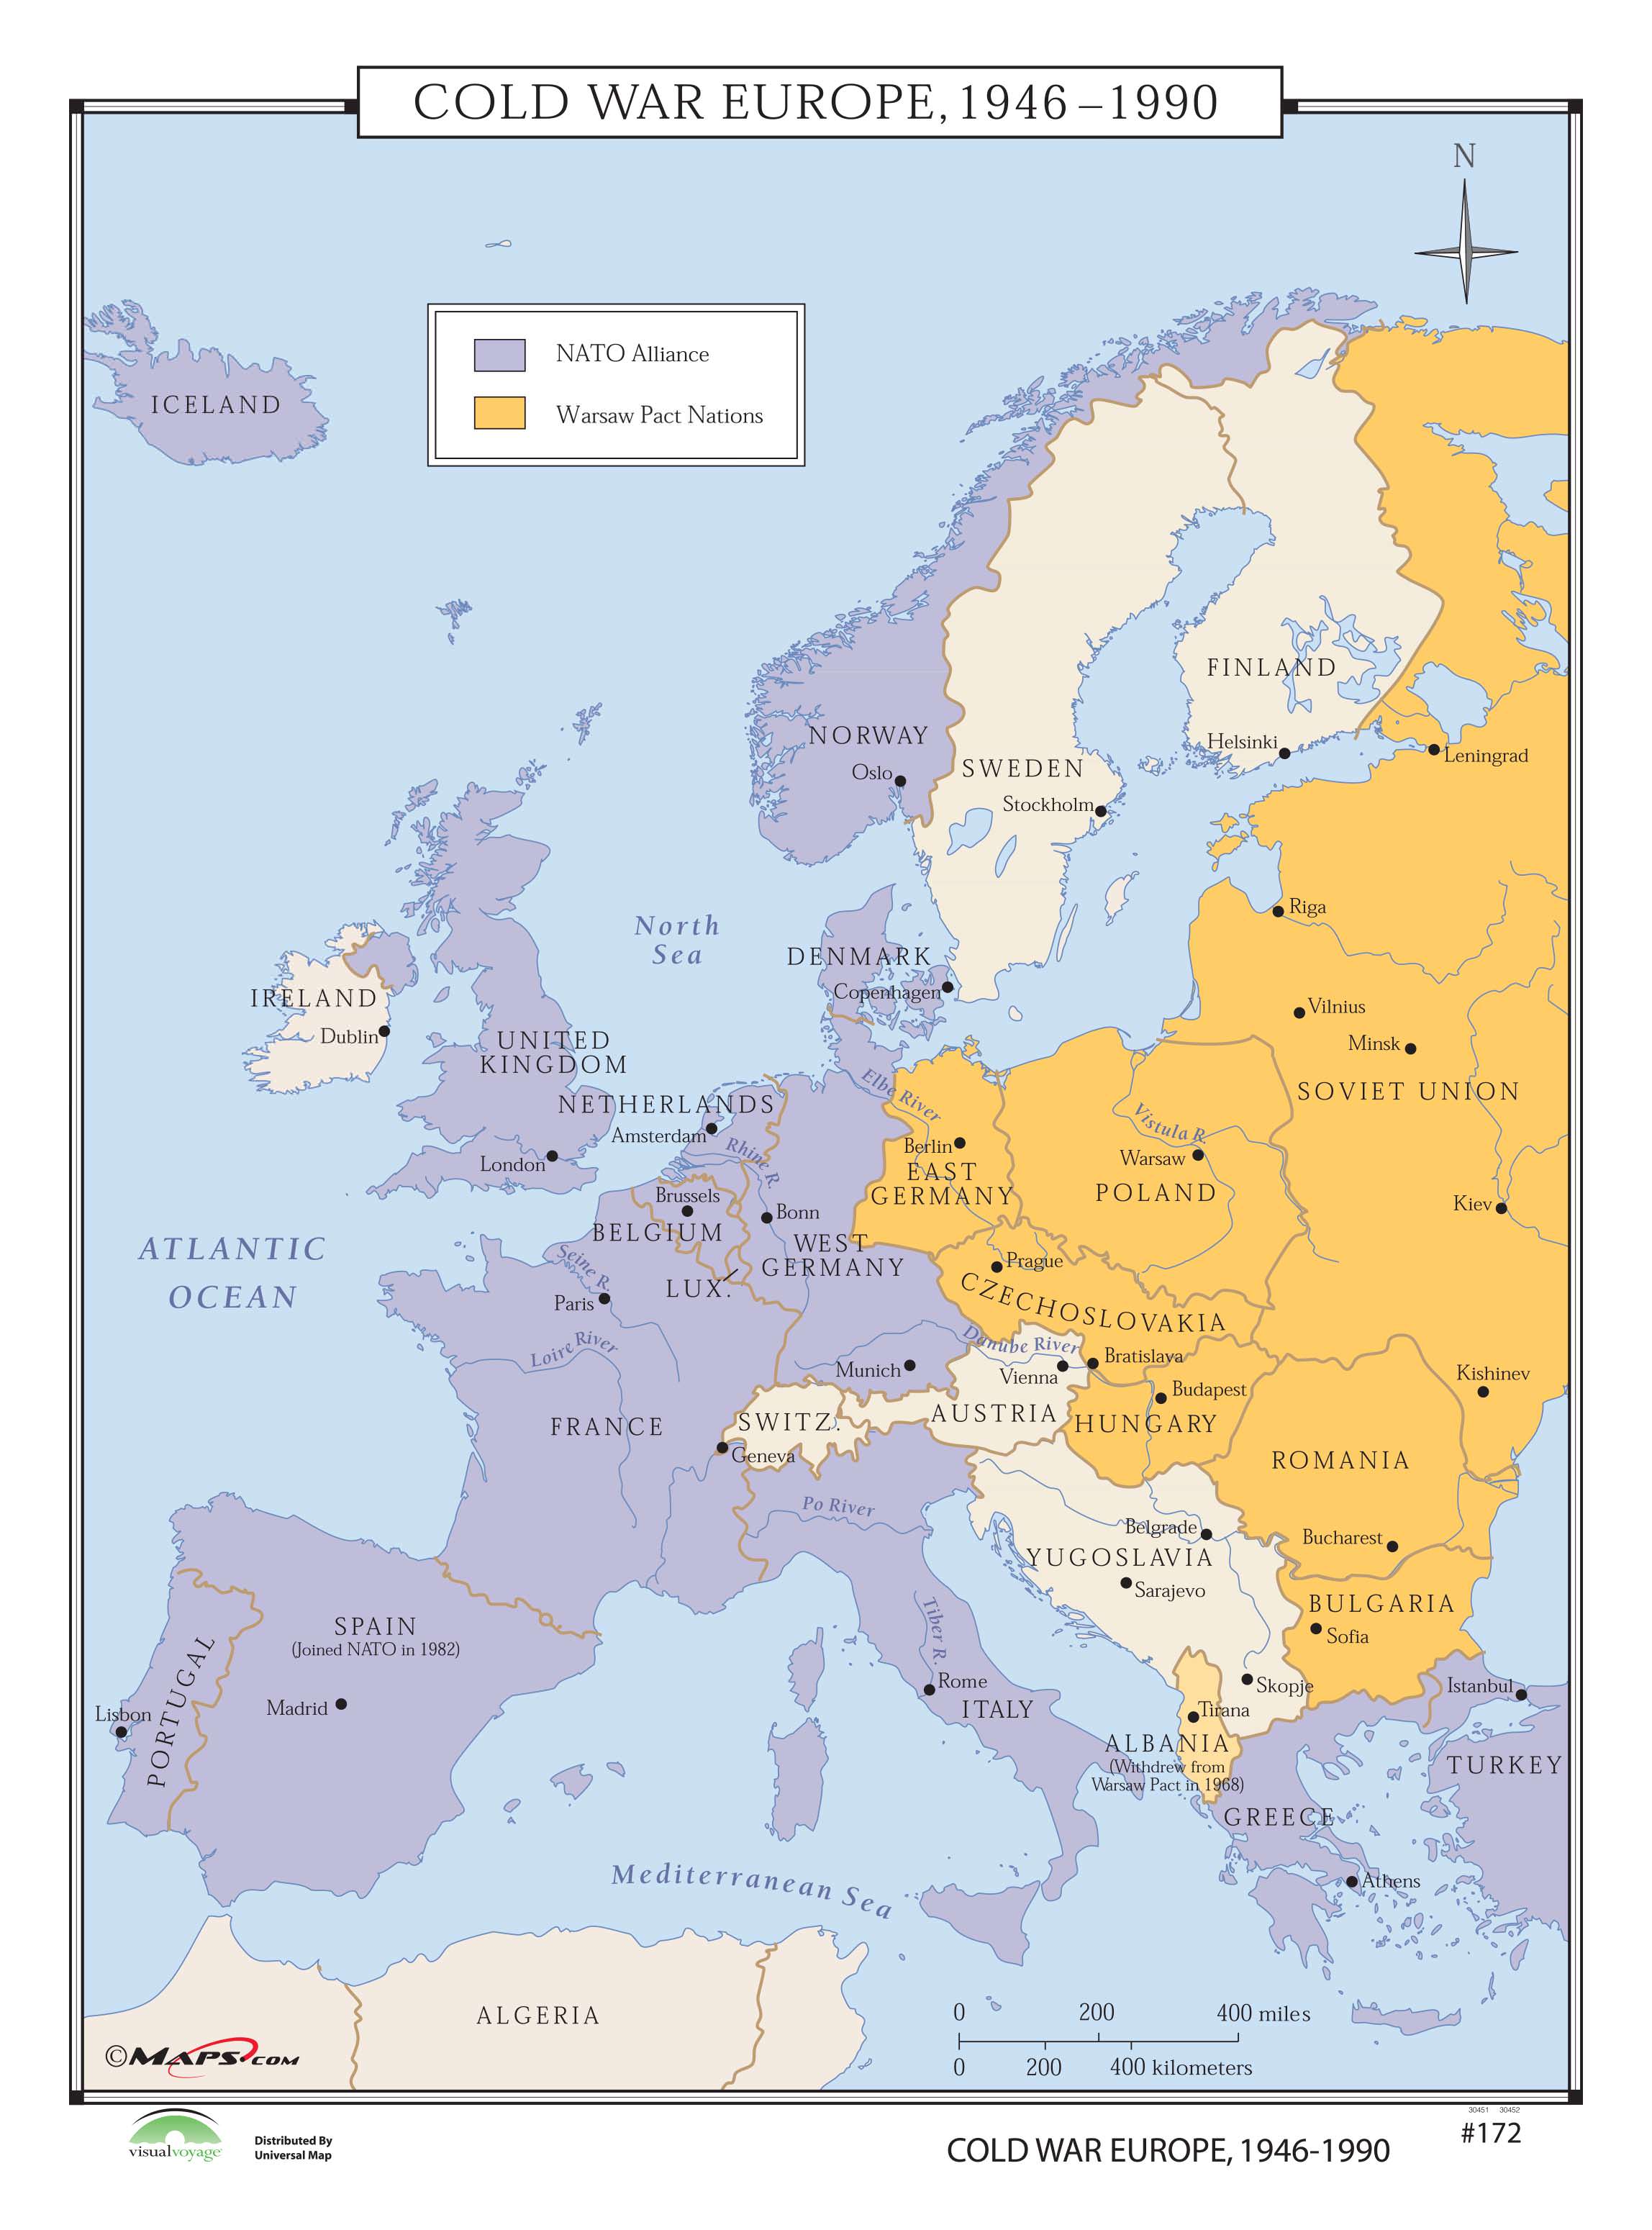 172 Cold War Europe, 1946-1990 - The Map